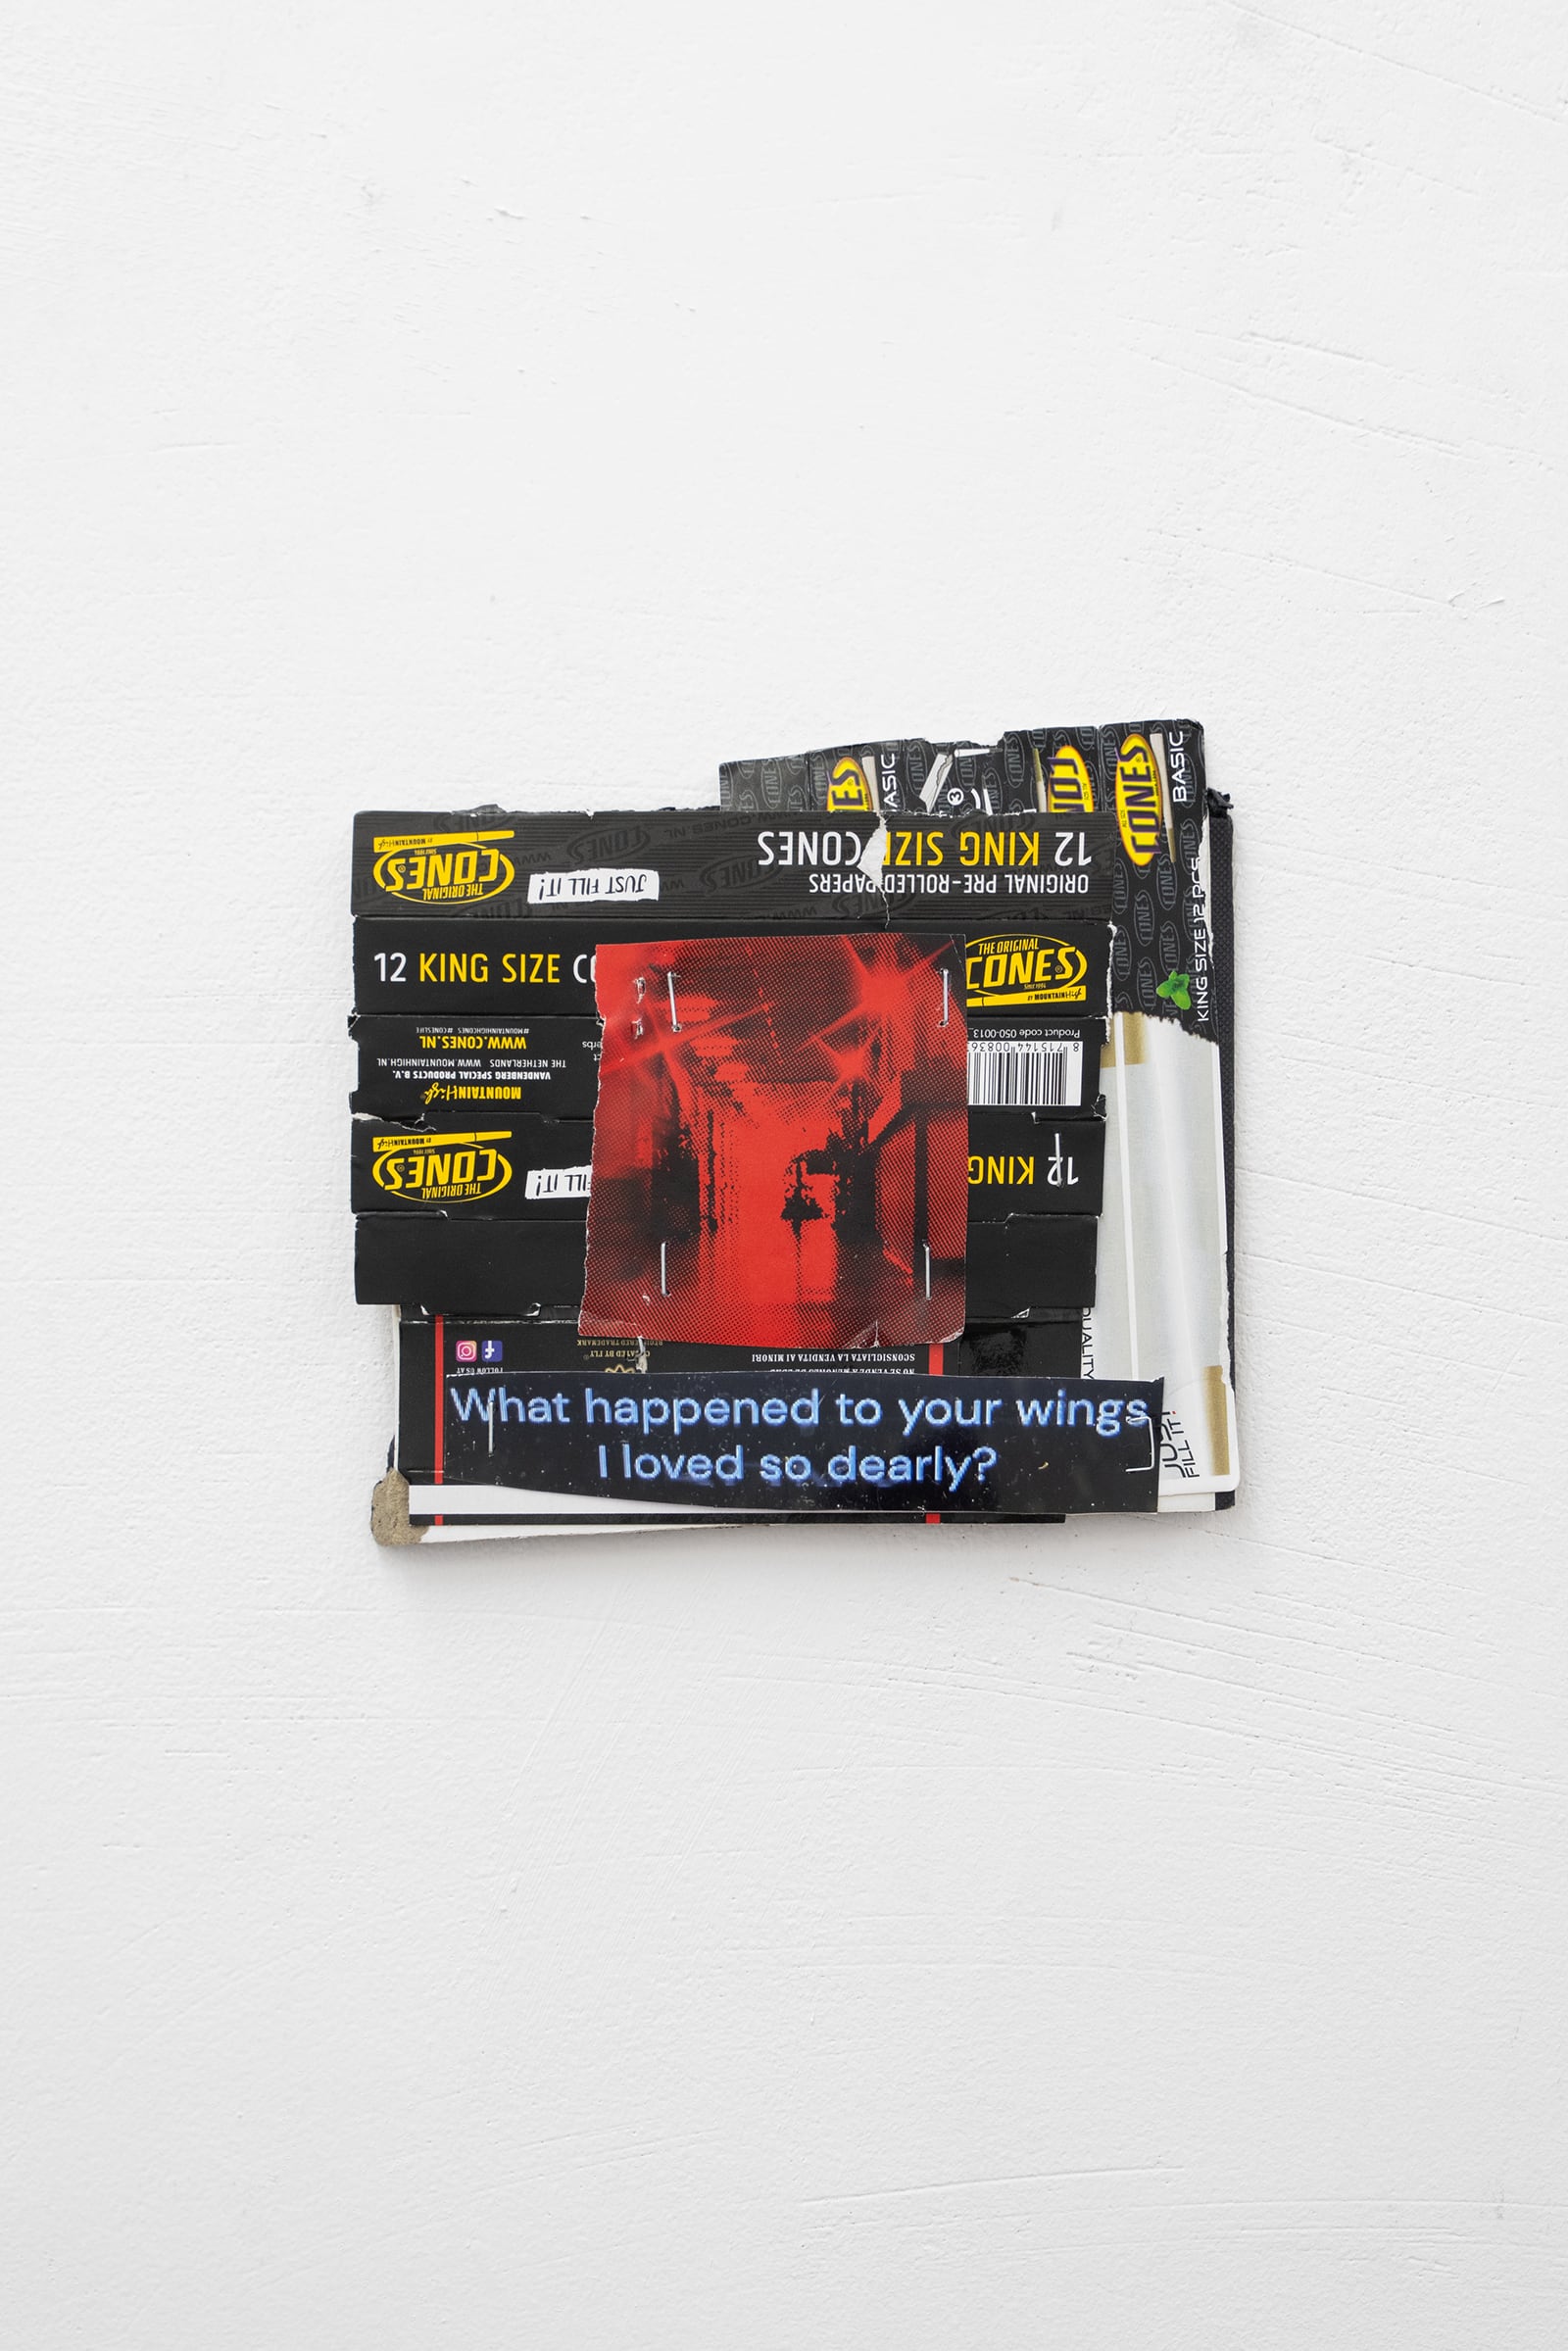 Victor Vejle, Leave me on the floor (Staircase), 2021, photo paper, cut out, staples and cardboard on book cover, 10 x 16 cm